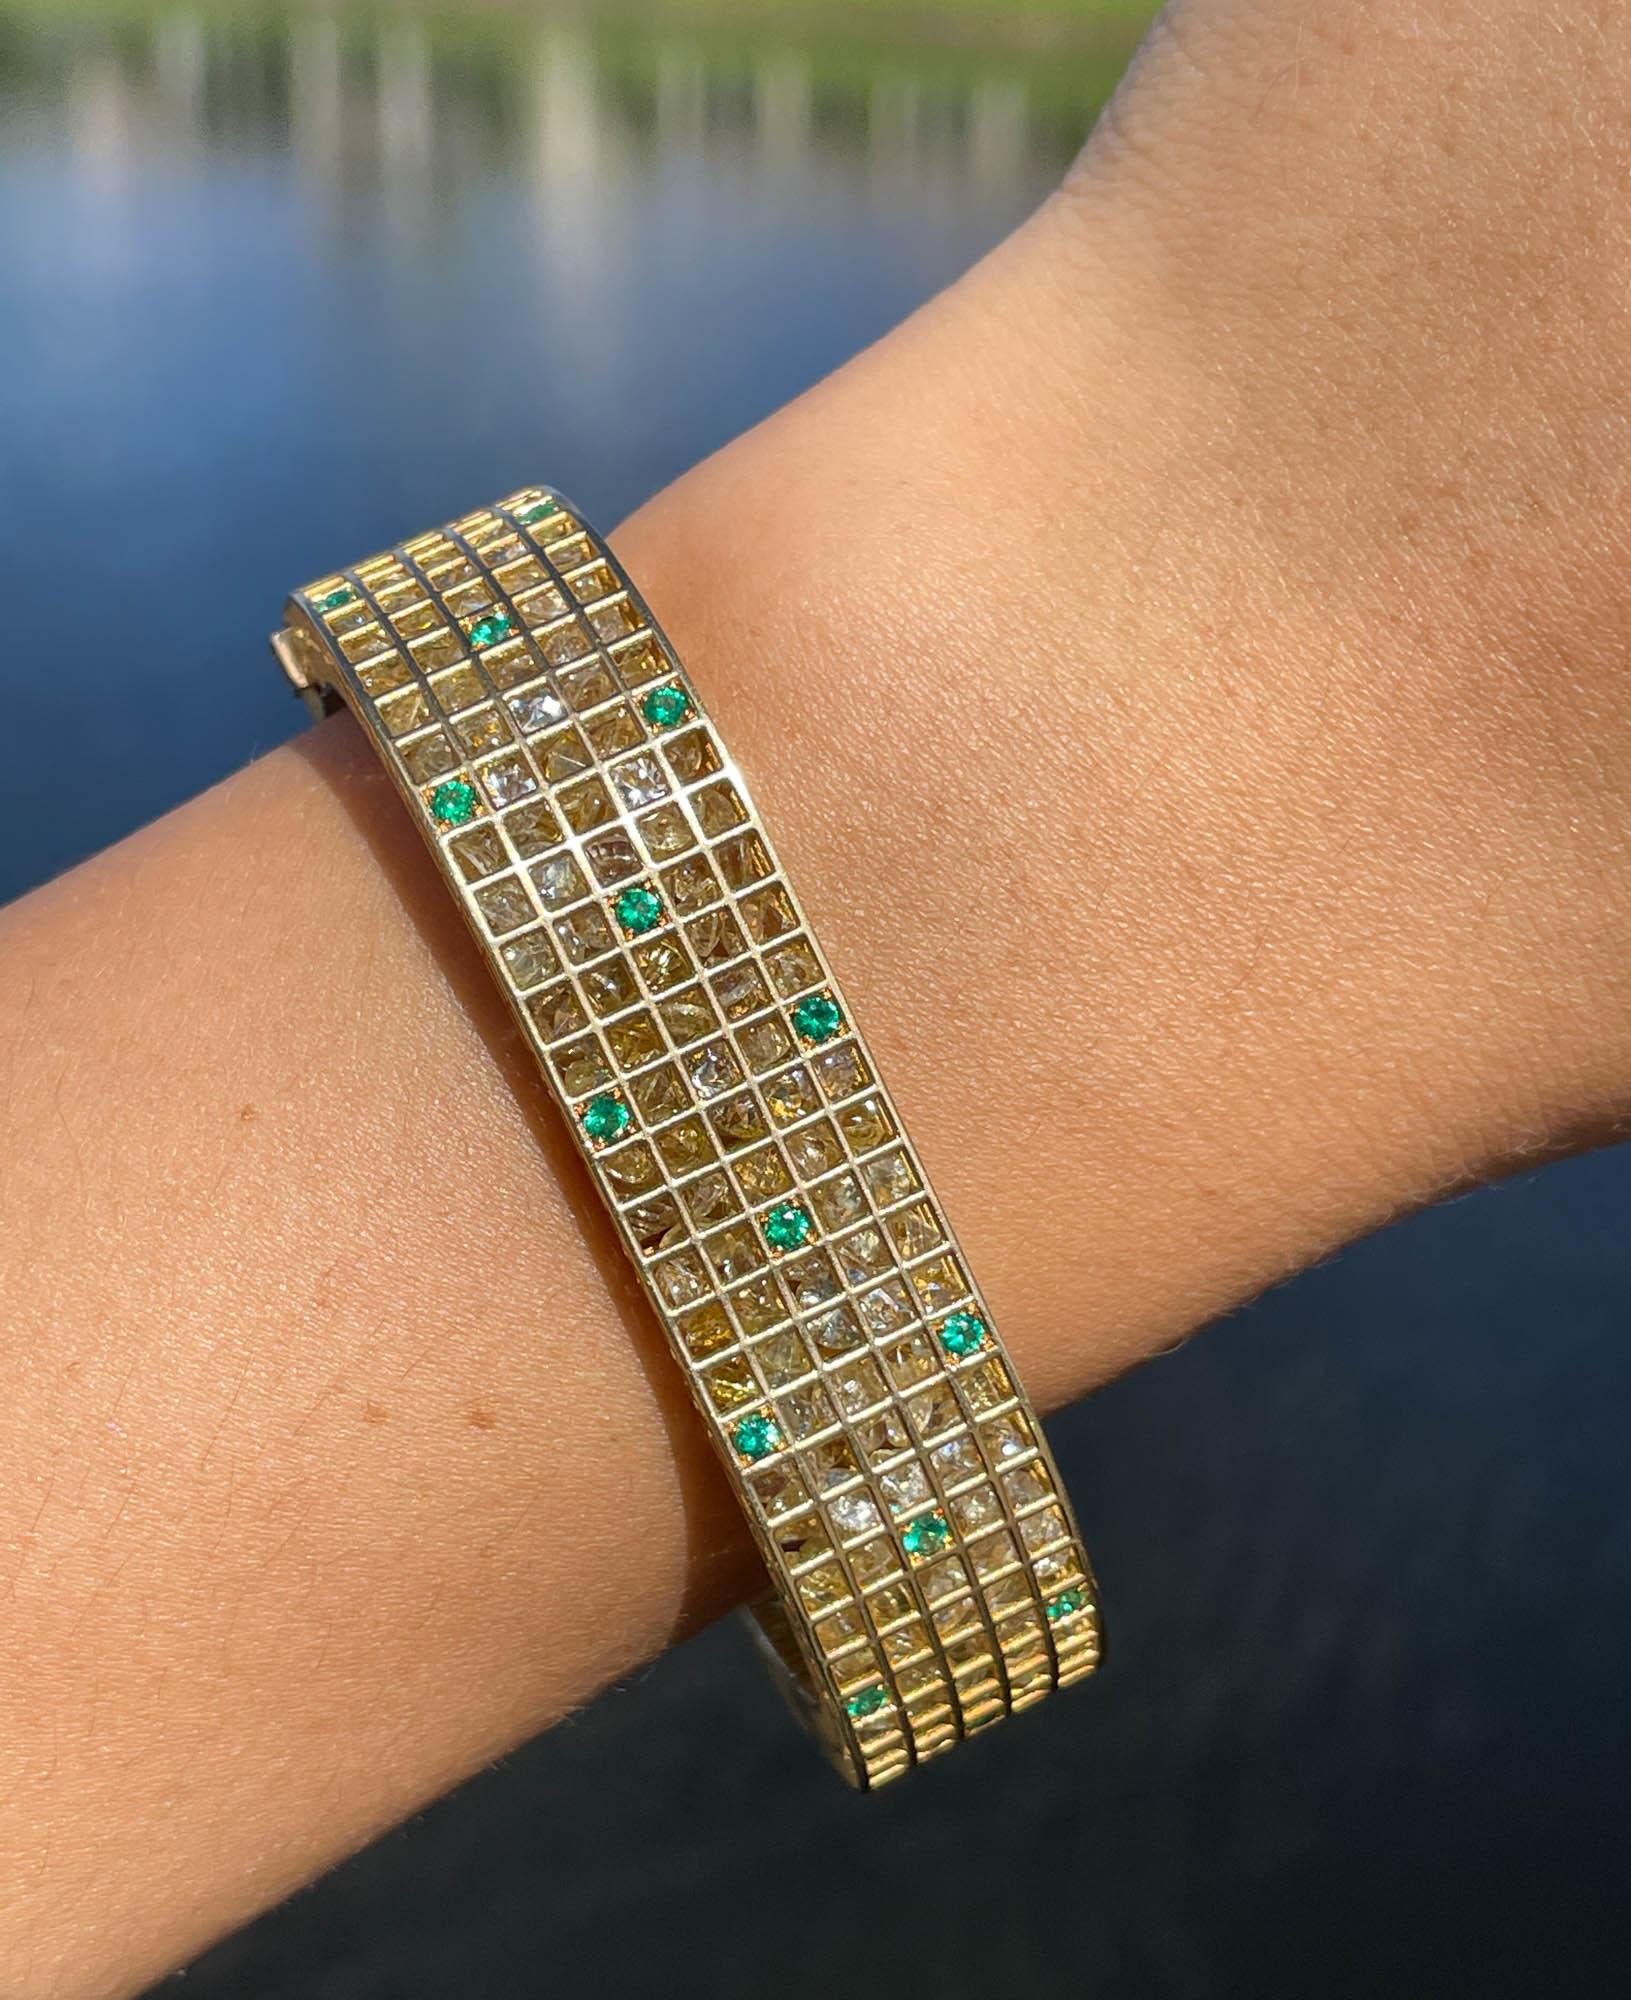 Roule & Company 18k Yellow Gold Yellow Sapphire Emerald and Diamond Pixel Dust Bracelet 
Total carat weight: 91.05ctw Yellow Sapphires; 0.97ctw Green Emeralds and 0.15ctw Diamonds.
The bracelet is 14.24mm wide and fit size 7 inches. The total weight